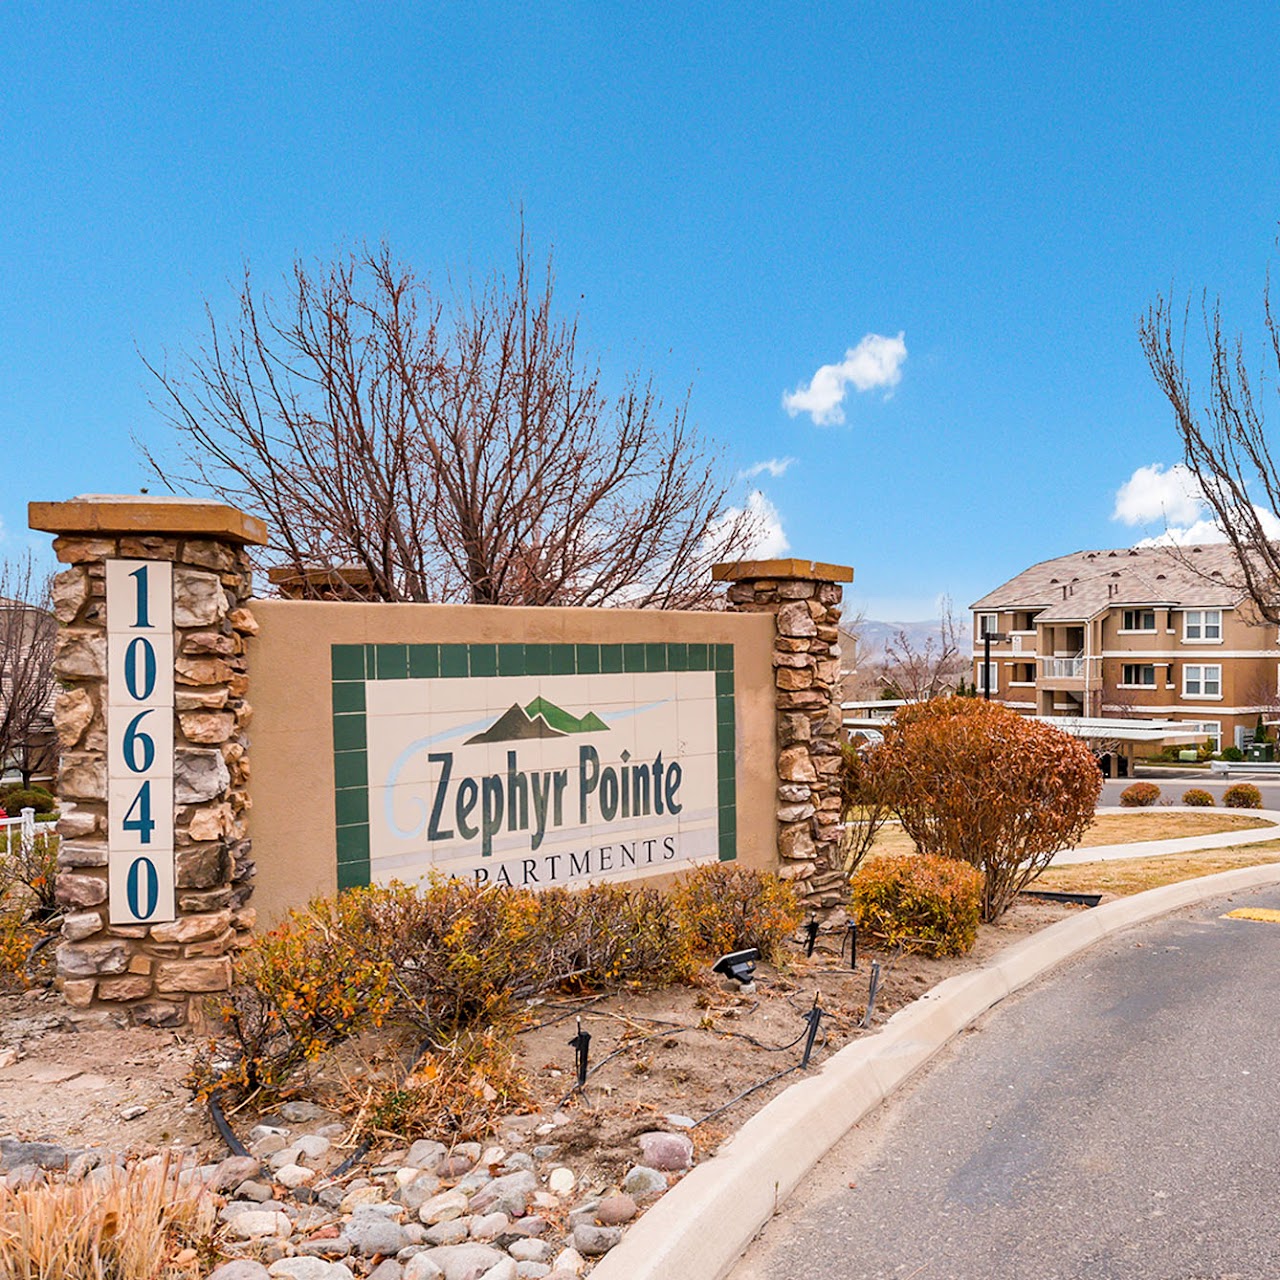 Photo of ZEPHYR POINTE APARTMENTS. Affordable housing located at 10640 N MCCARRAN BLVD RENO, NV 89503